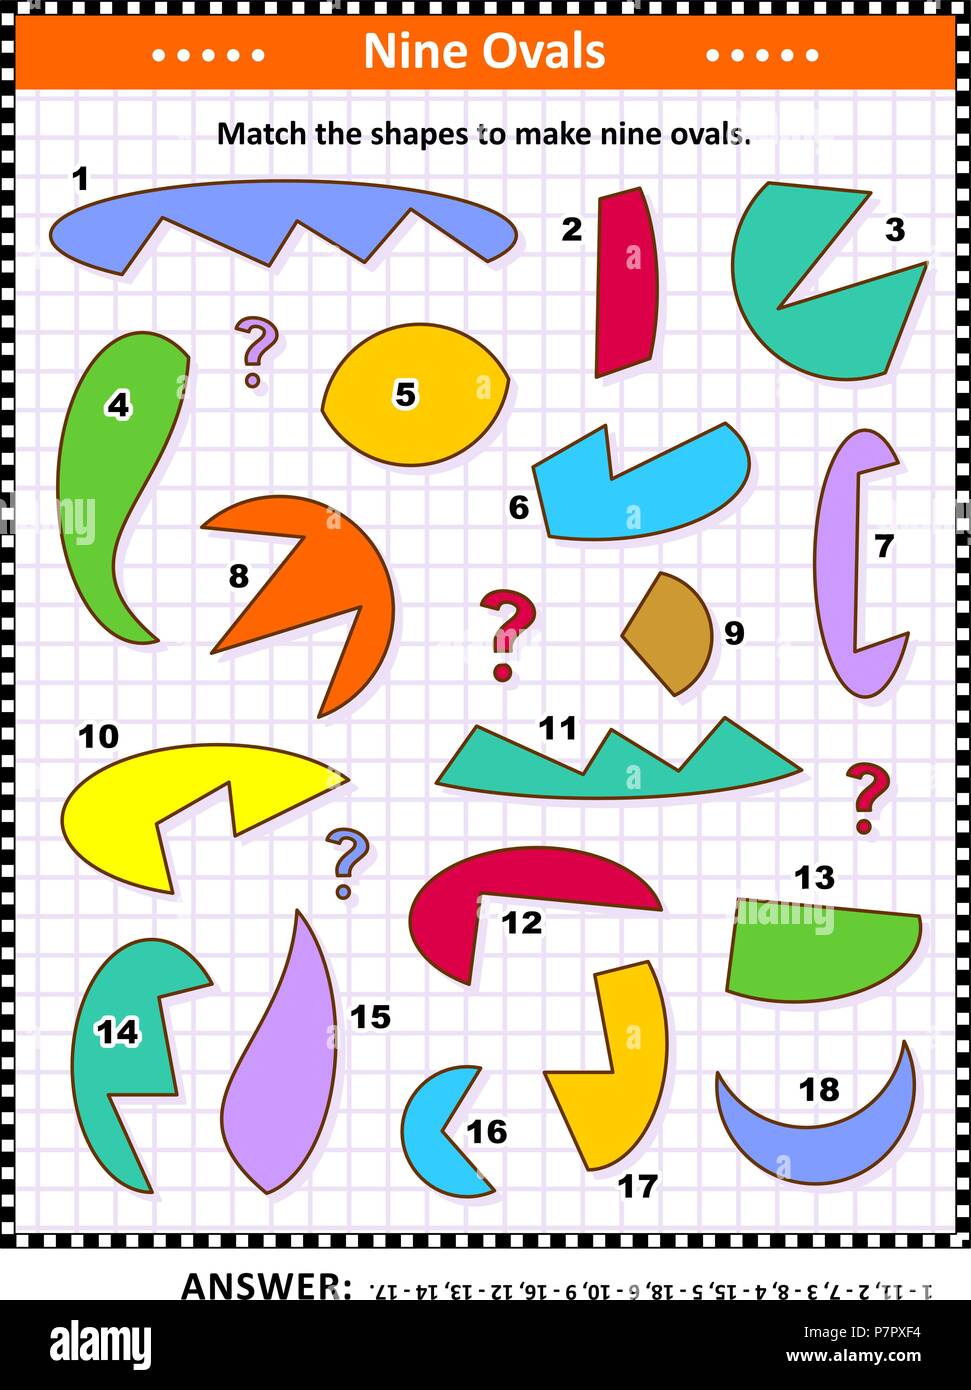 IQ and spatial skills training math visual puzzle: Match the shapes to make nine ovals, or ellipses. Answer included. Stock Vector